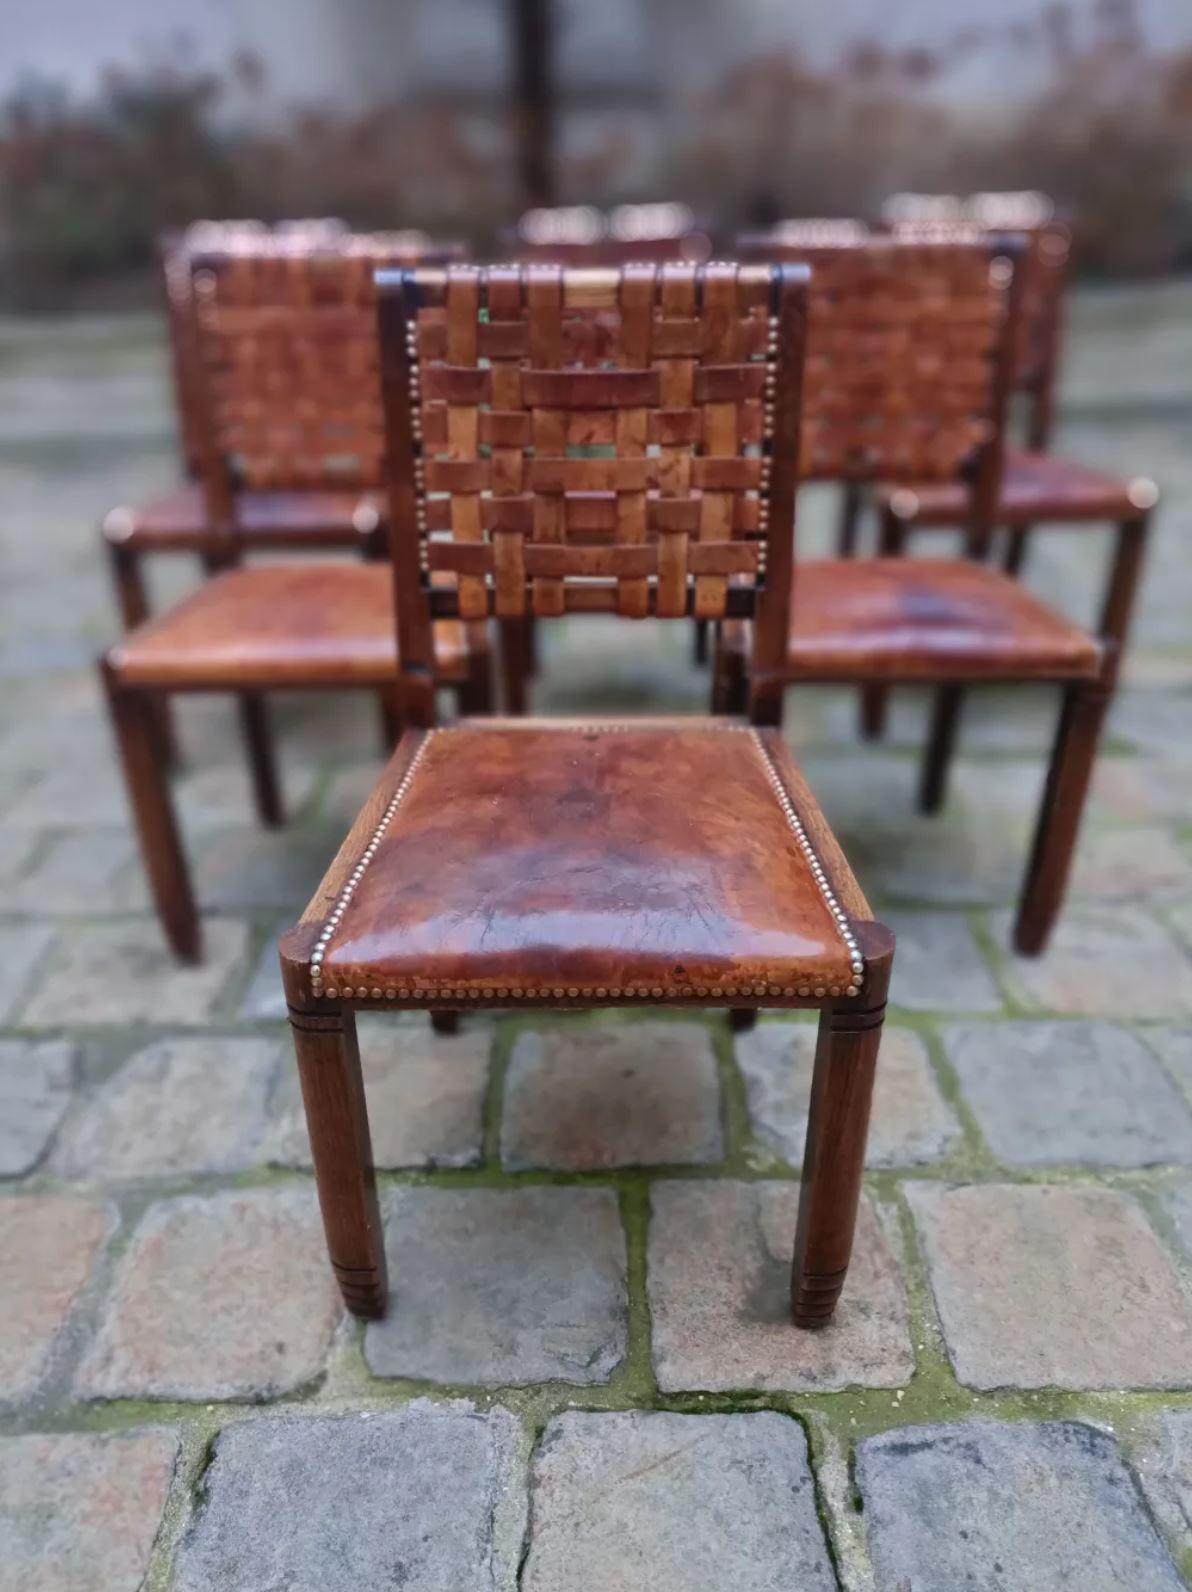 6 Brutalist Leather and Wood Chairs, 50s like Pierre Chapo or Charlotte Perriand In Good Condition For Sale In Paris, FR